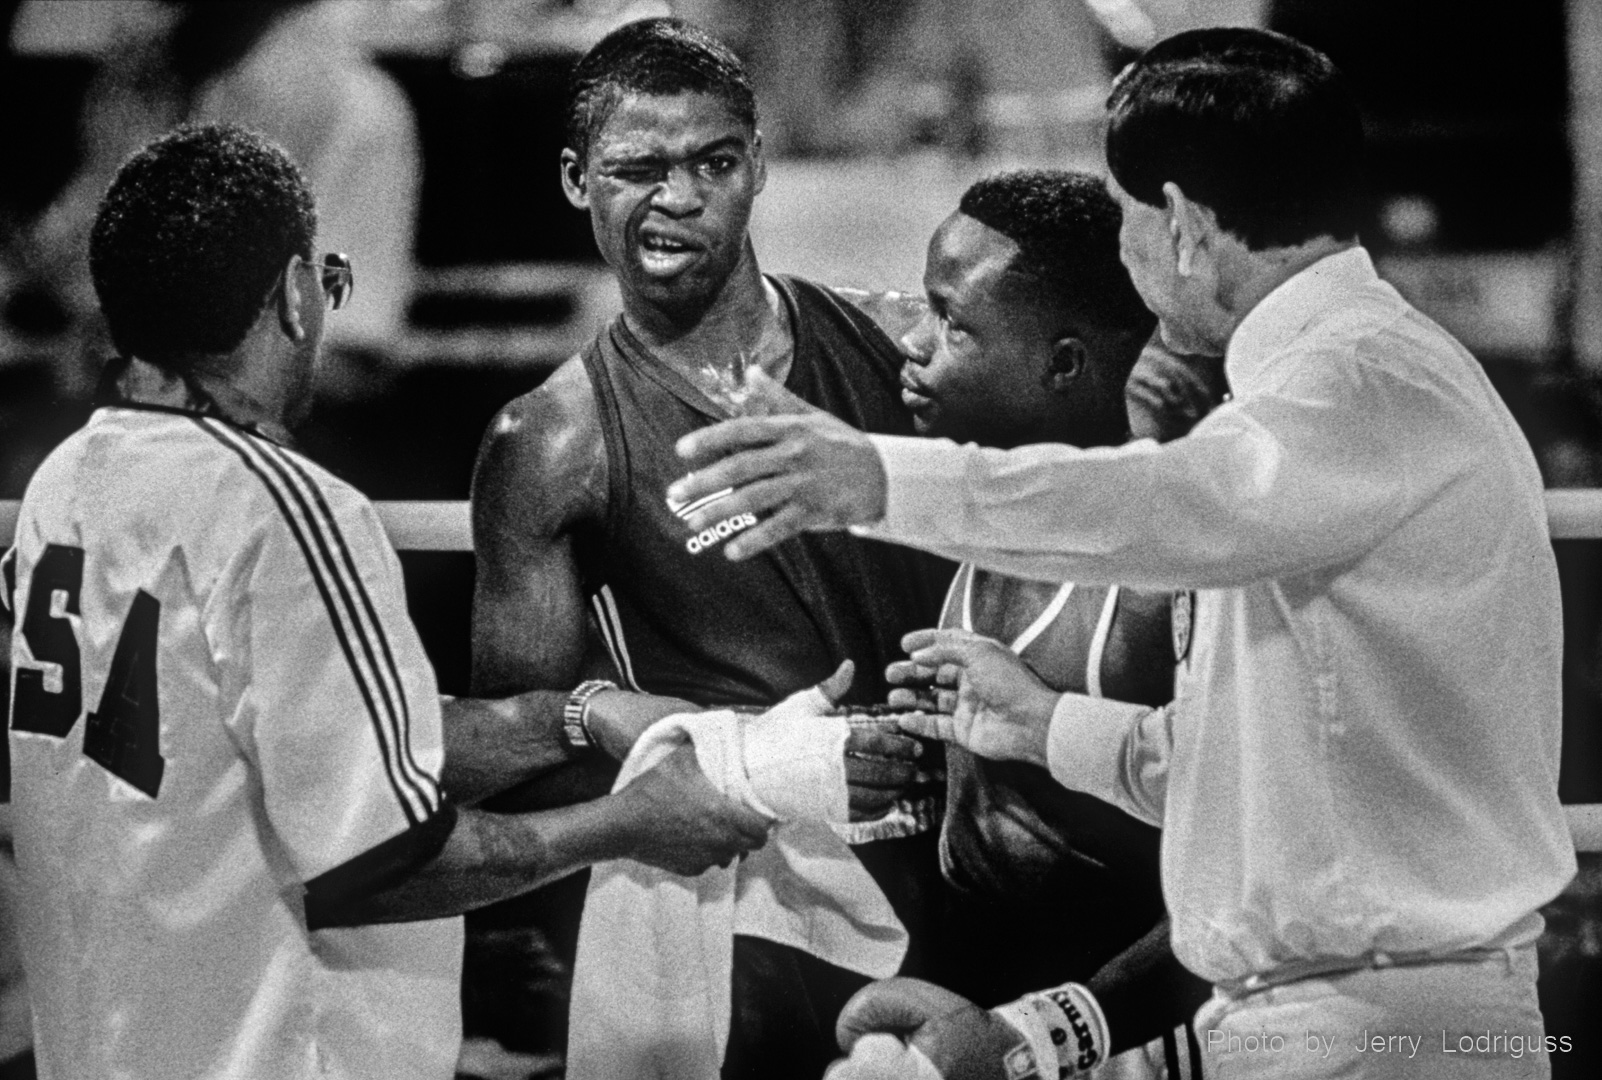 The USA's Kelcie Banks checks his jaw after being knocked out by Holland's Regilio Turr with the first punch 10 seconds into the fight in the 57 kilogram weight category of the boxing competition during the 1988 Olympic Games in Seoul, South Korea.